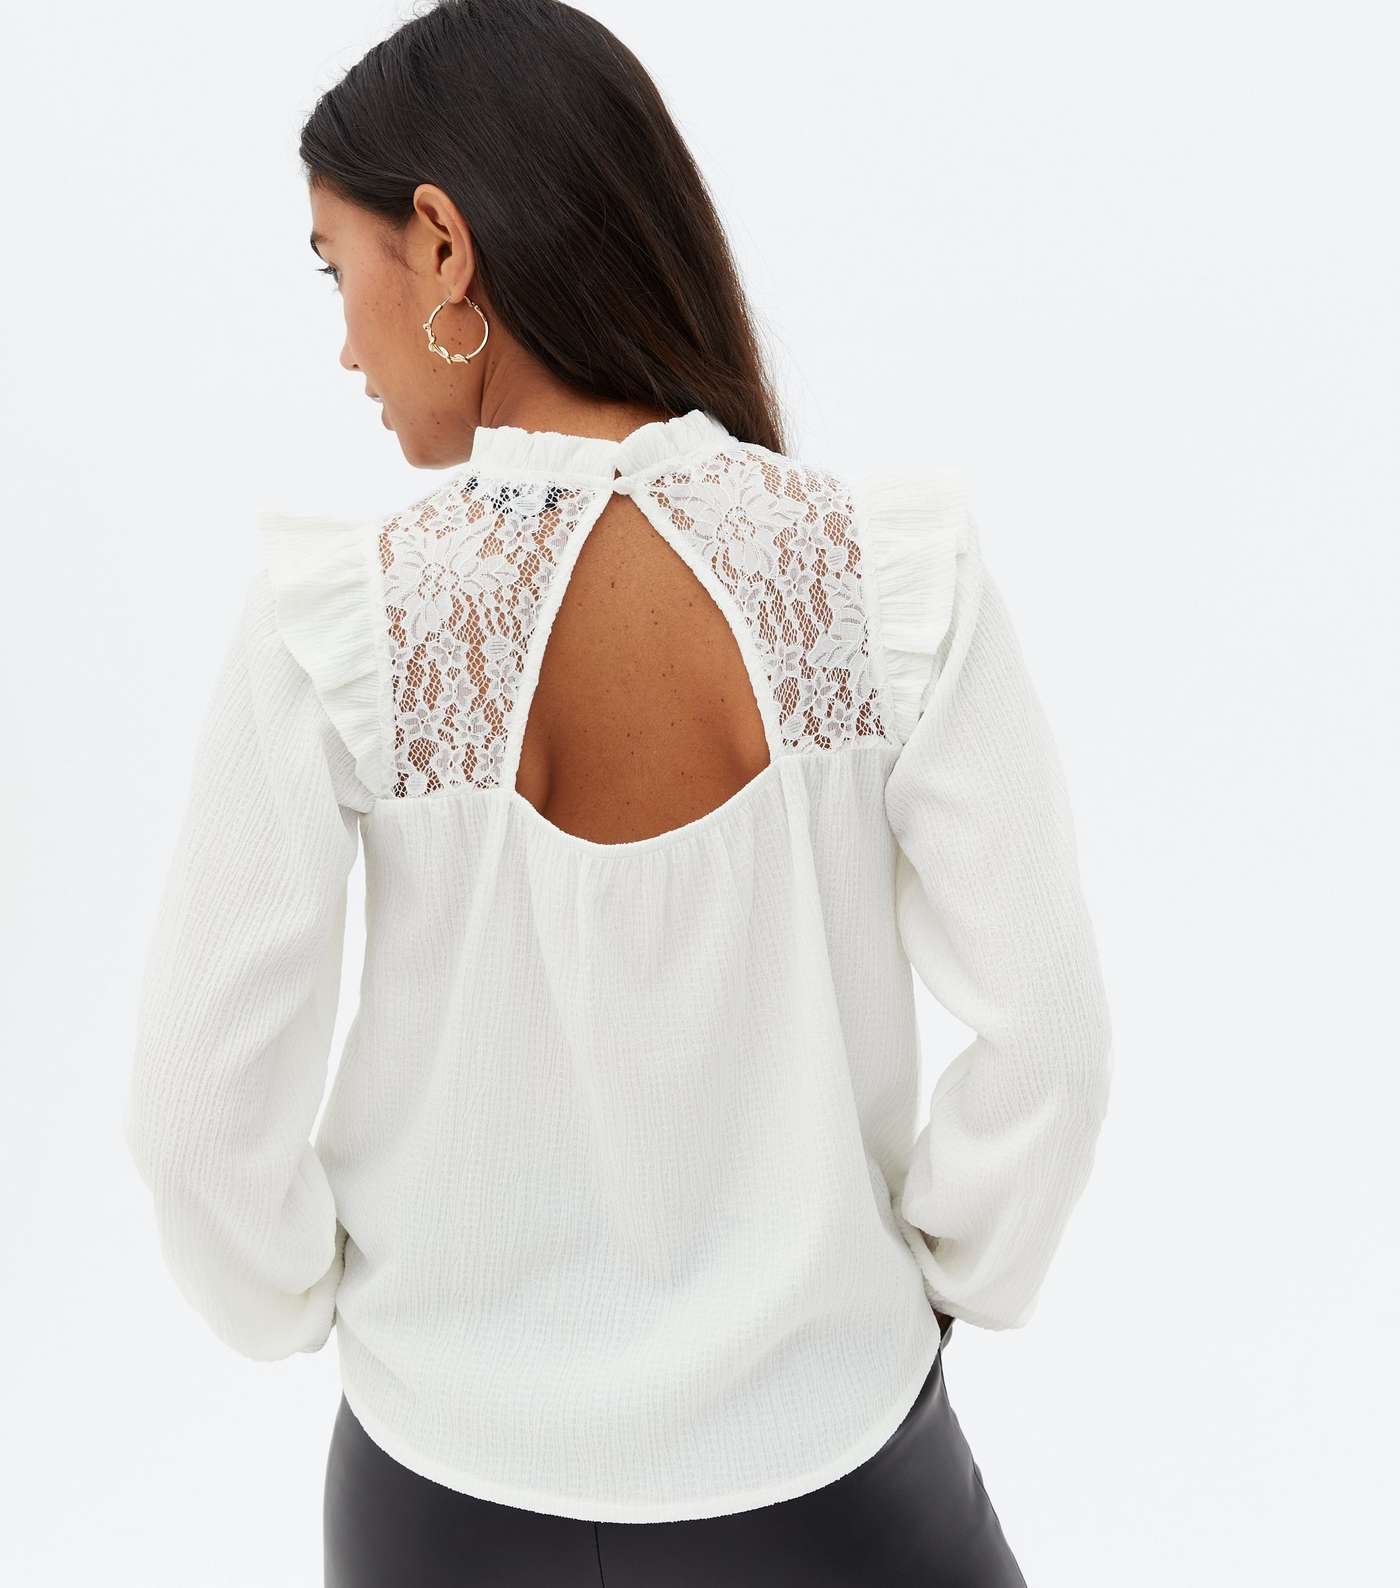 Off White Textured Lace Yoke Frill High Neck Blouse Image 4